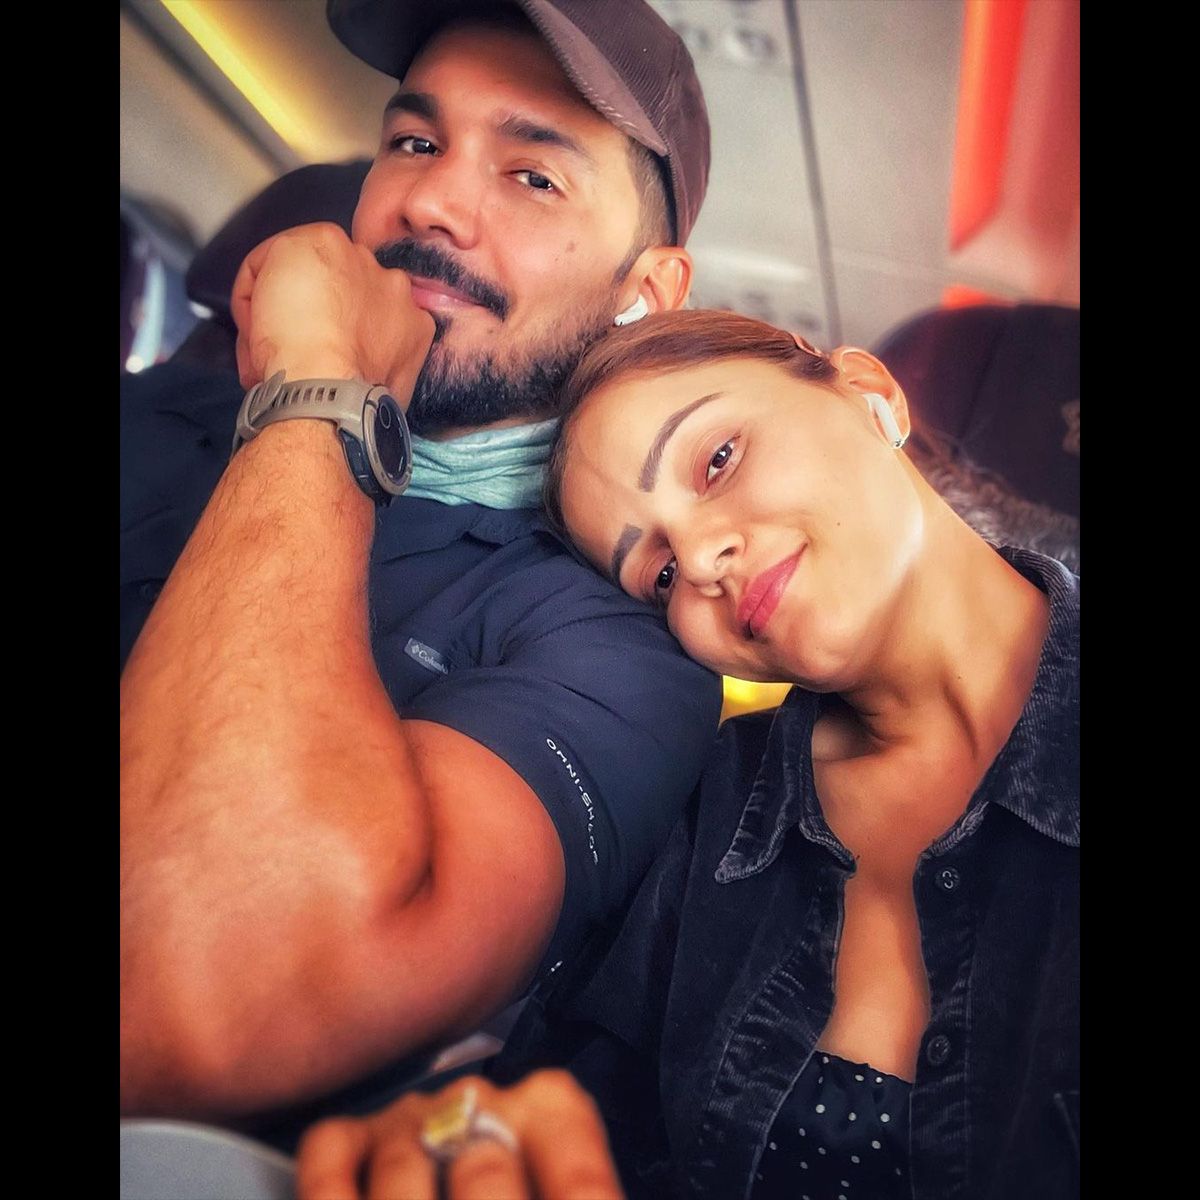 Rubina Dilaik and Abhinav Shukla are expecting their first child together, and they announced their pregnancy via social media on Saturday.
.
.
Head to our website for more information. The link is in the Bio!
.
#rubinadilaik #abhinavshukla #pregnant #parentstobe